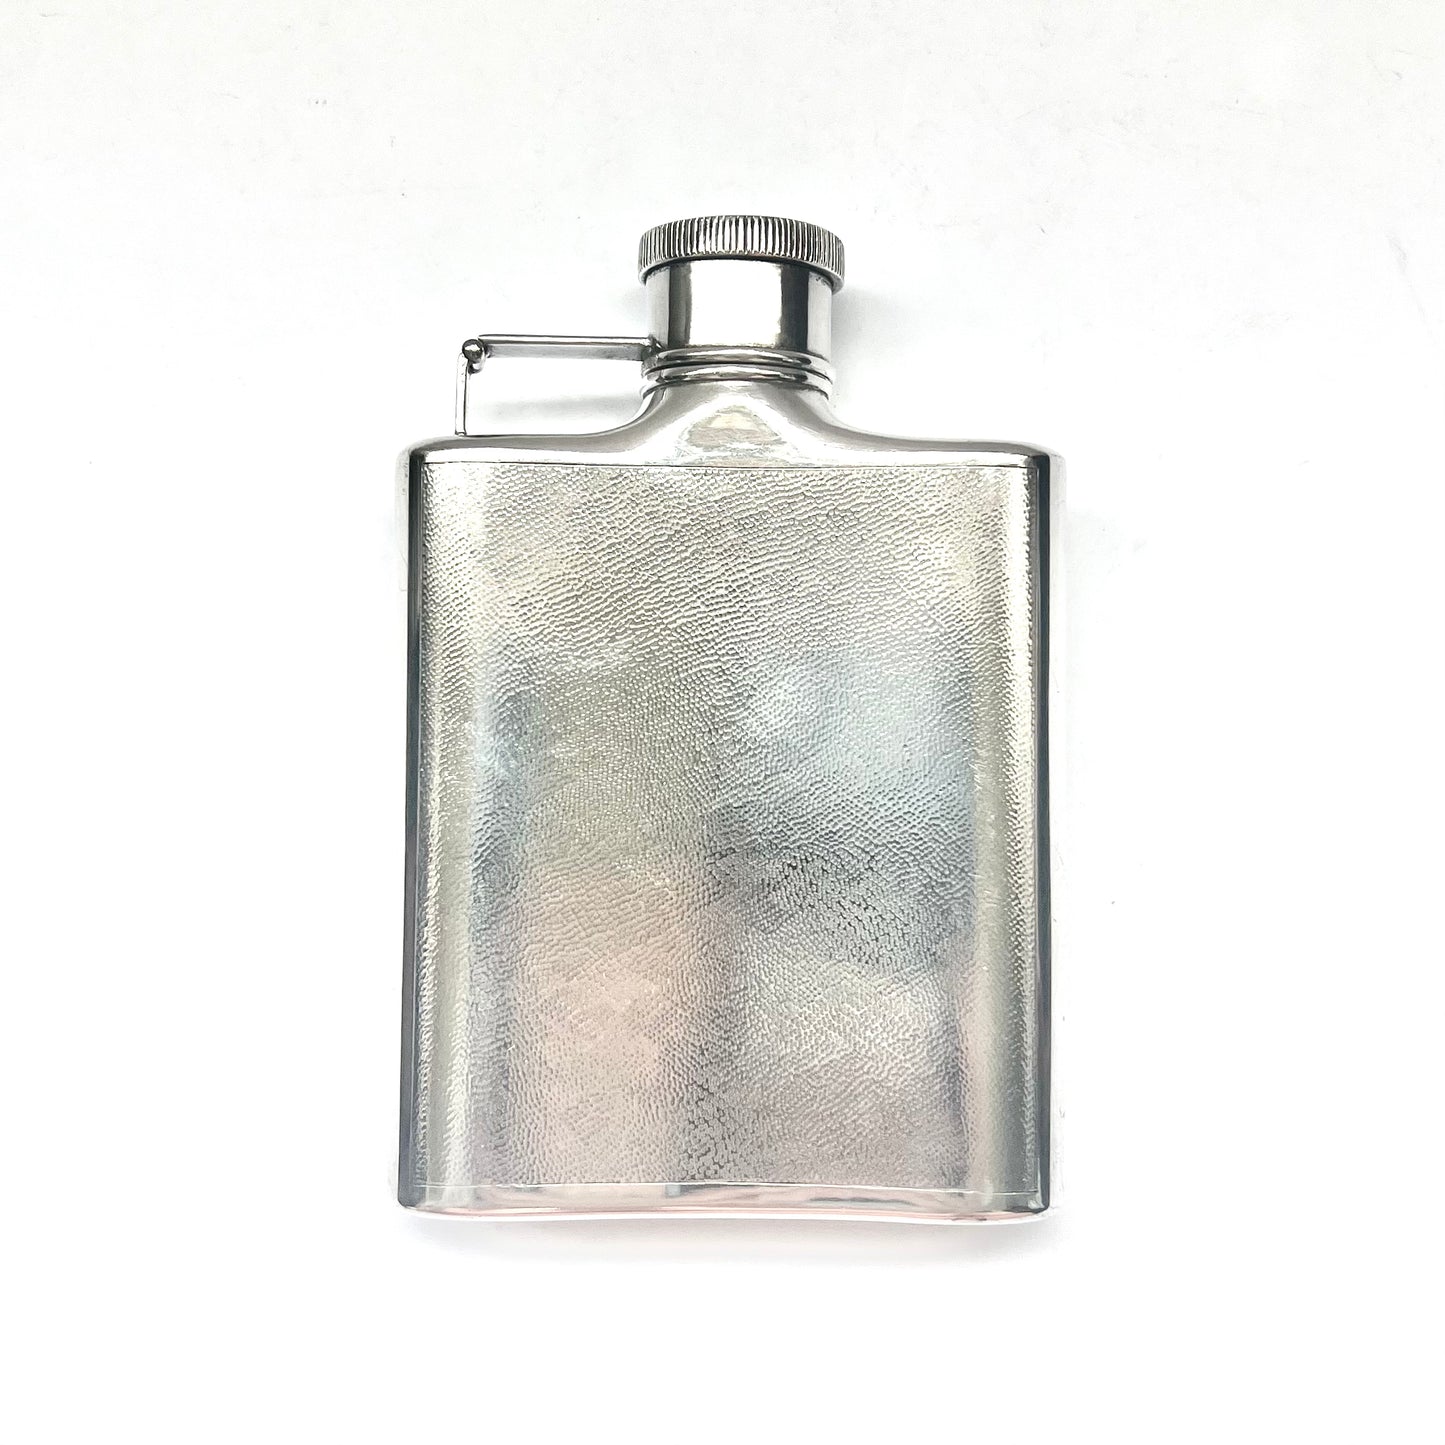 Antique Chinese export silver gentleman’s flask with marks for Zee Sung, Shanghai, 1900-1940